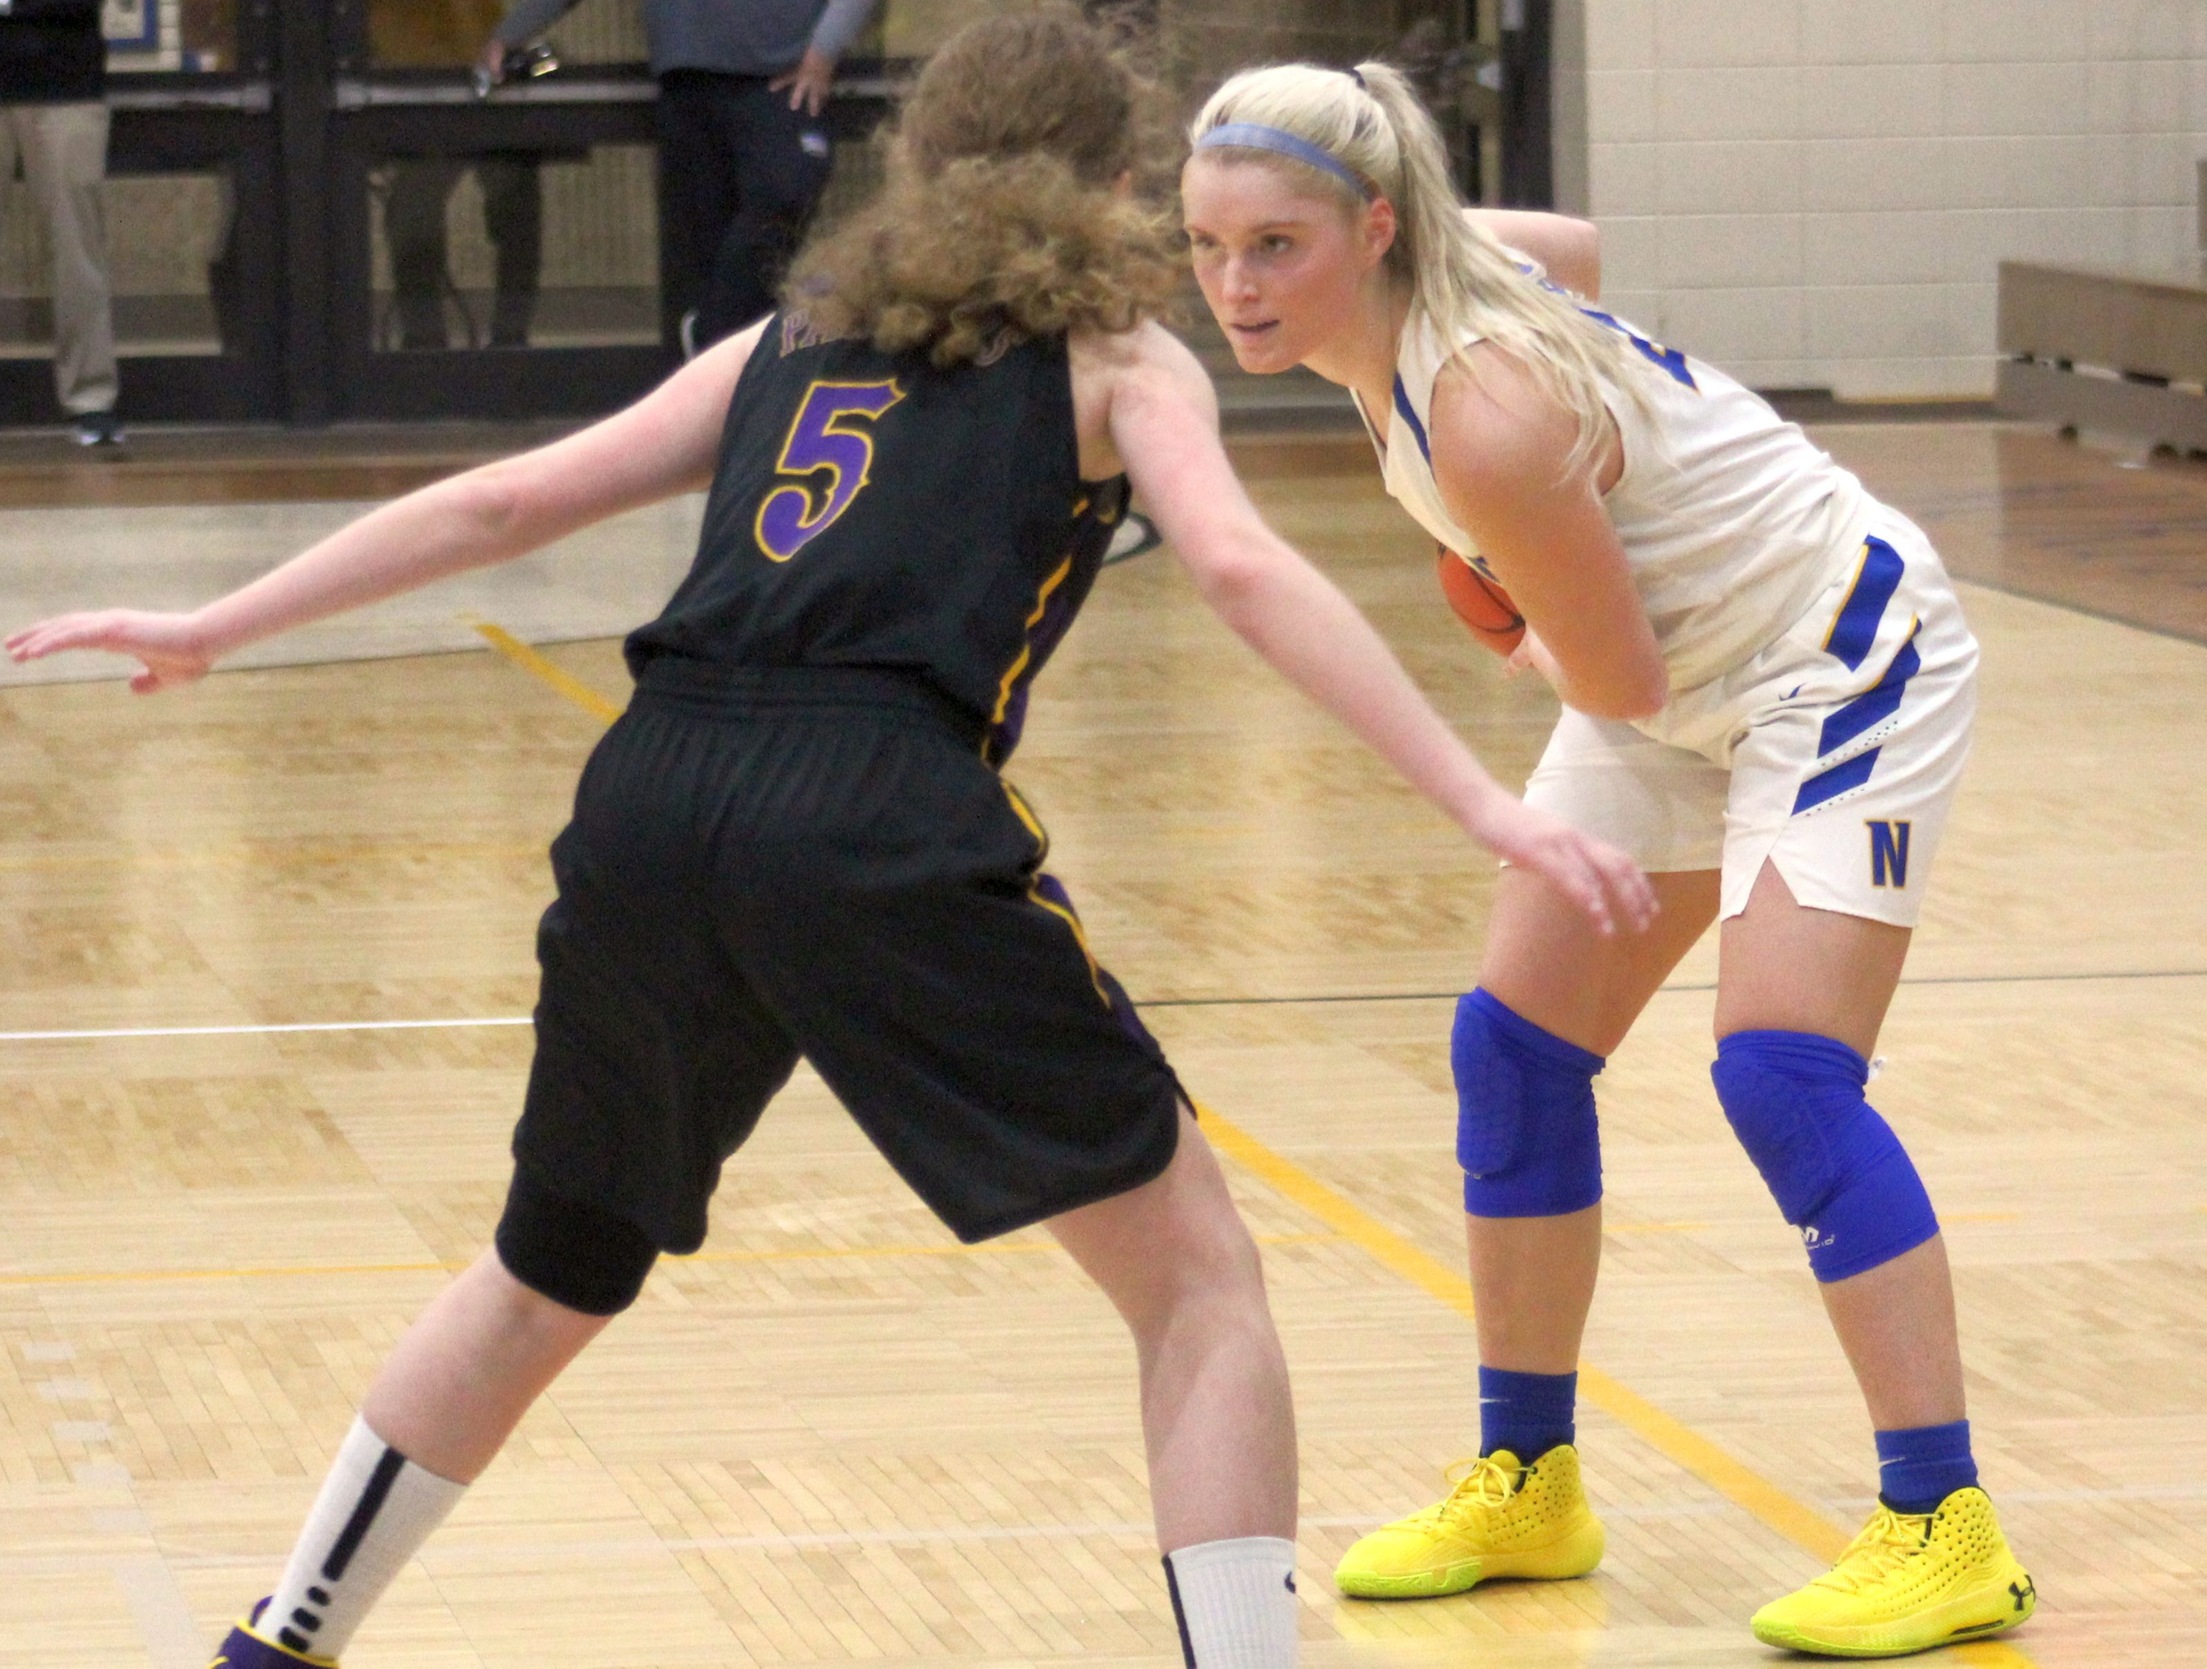 NIACC's Haley Hungerholt looks to make a move during a game last season against Ellsworth.